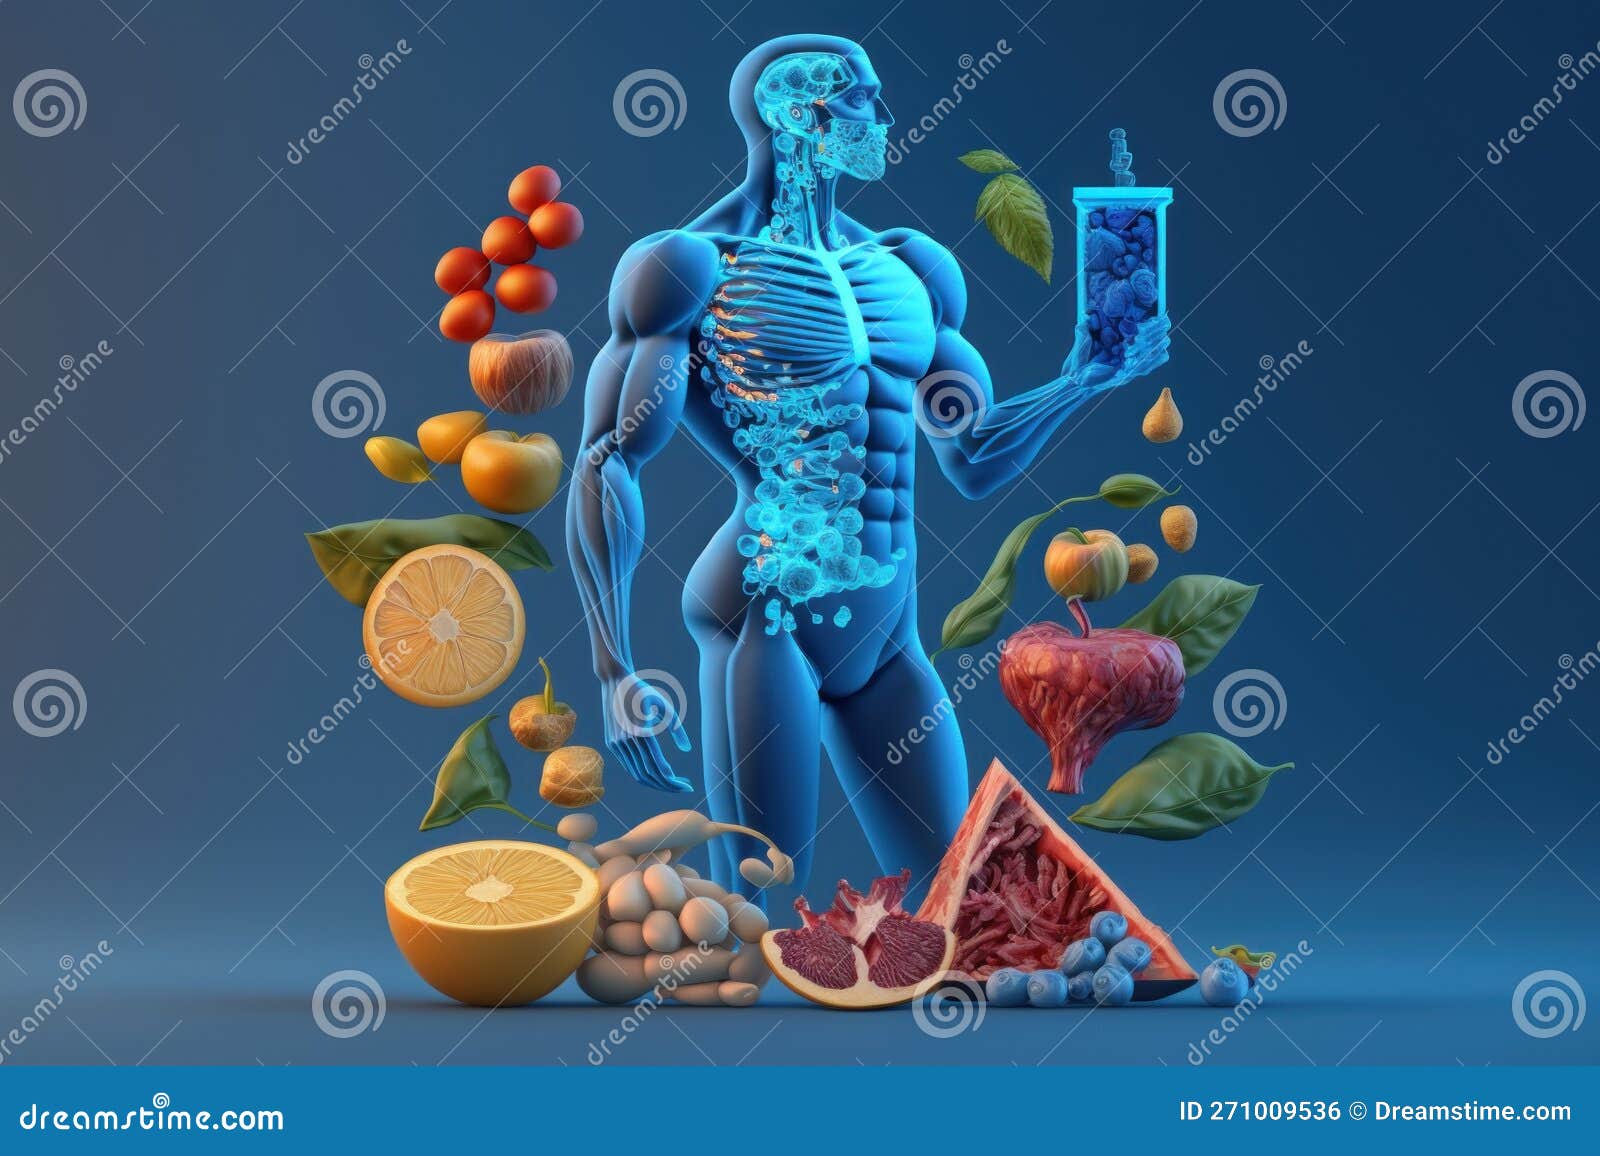 Fruits Forming a Human Body Metabolism and Nutrition, Eating Diet